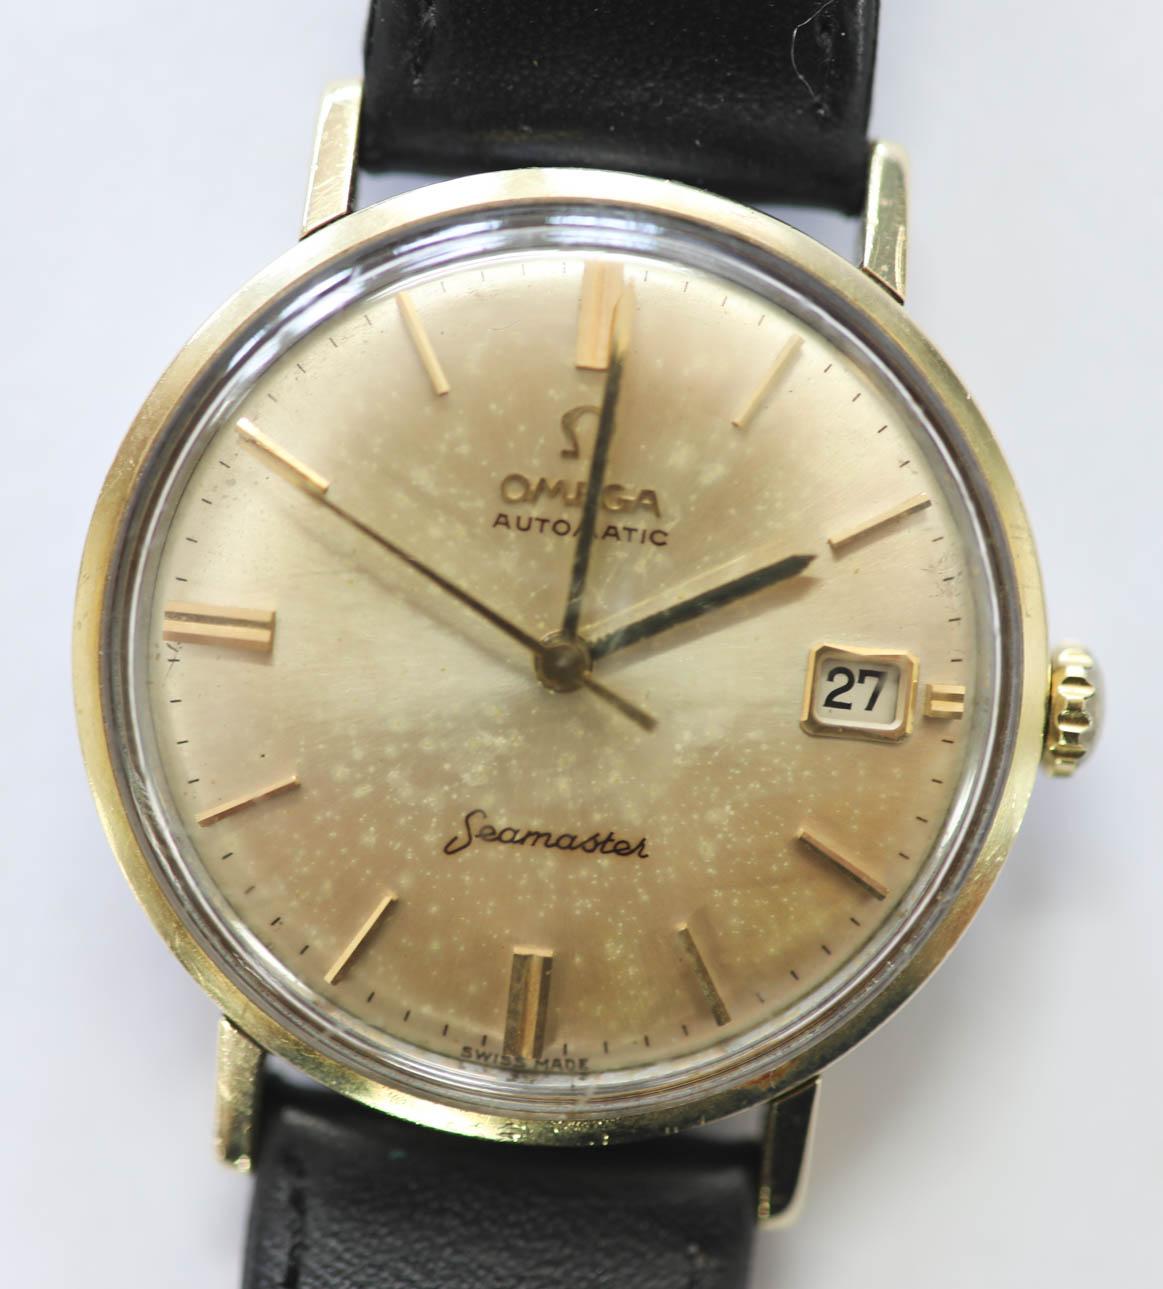 Omega, vintage gents automatic date Seamaster wristwatch, gold capped, with receipt and papers dated - Image 6 of 6